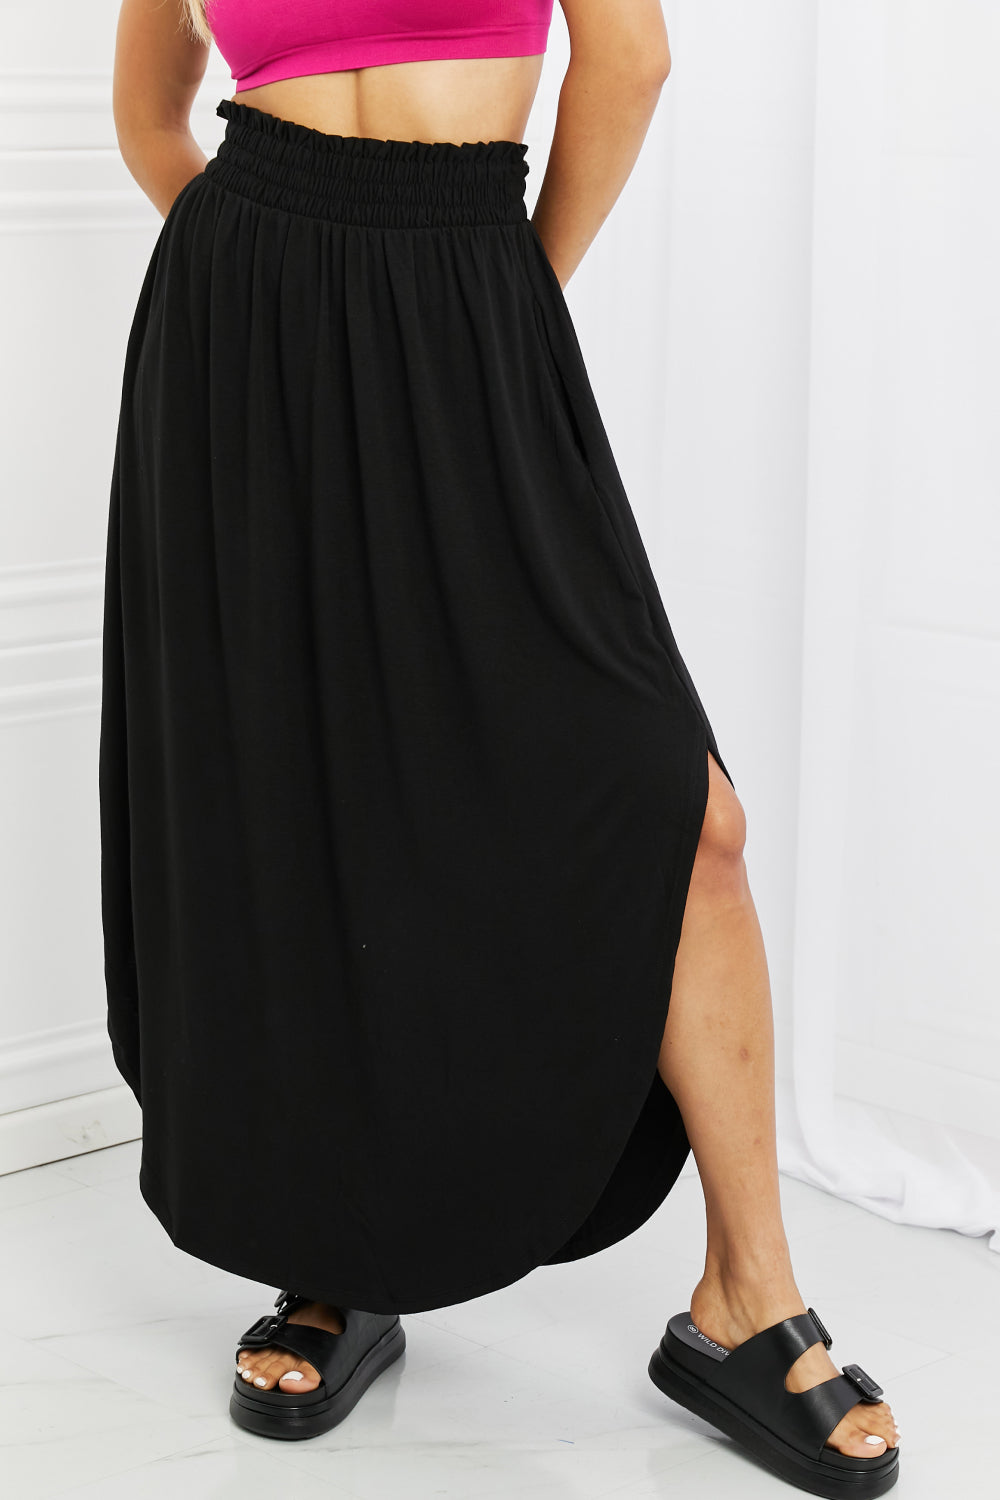 Zenana It's My Time Full Size Side Scoop Scrunch Skirt in Black free shipping -Oh Em Gee Boutique